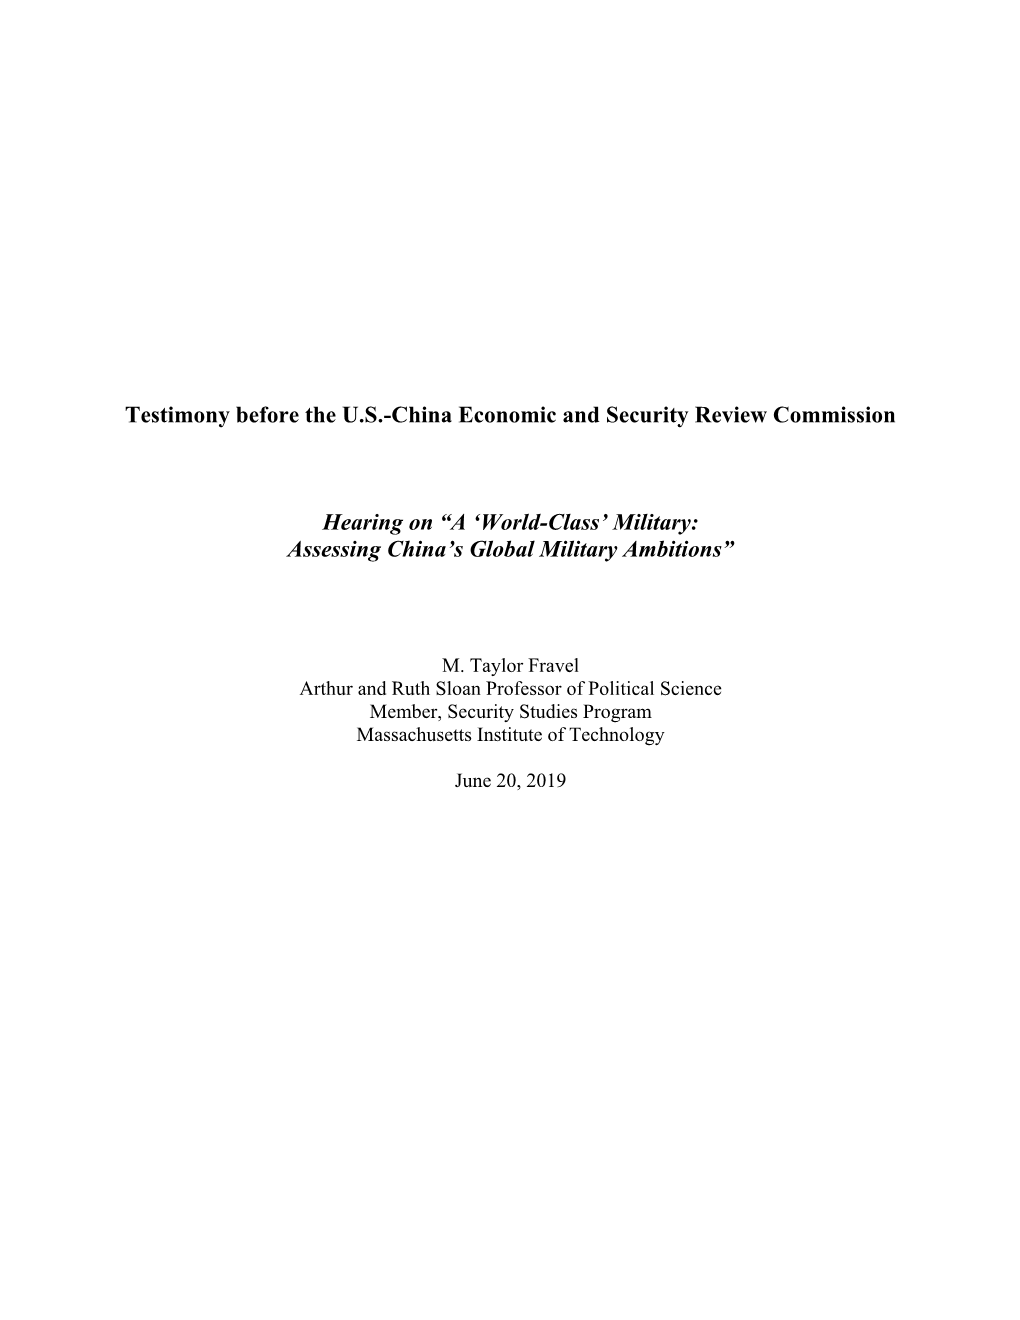 Testimony Before the U.S.-China Economic and Security Review Commission Hearing on “A 'World-Class' Military: Assessing Ch